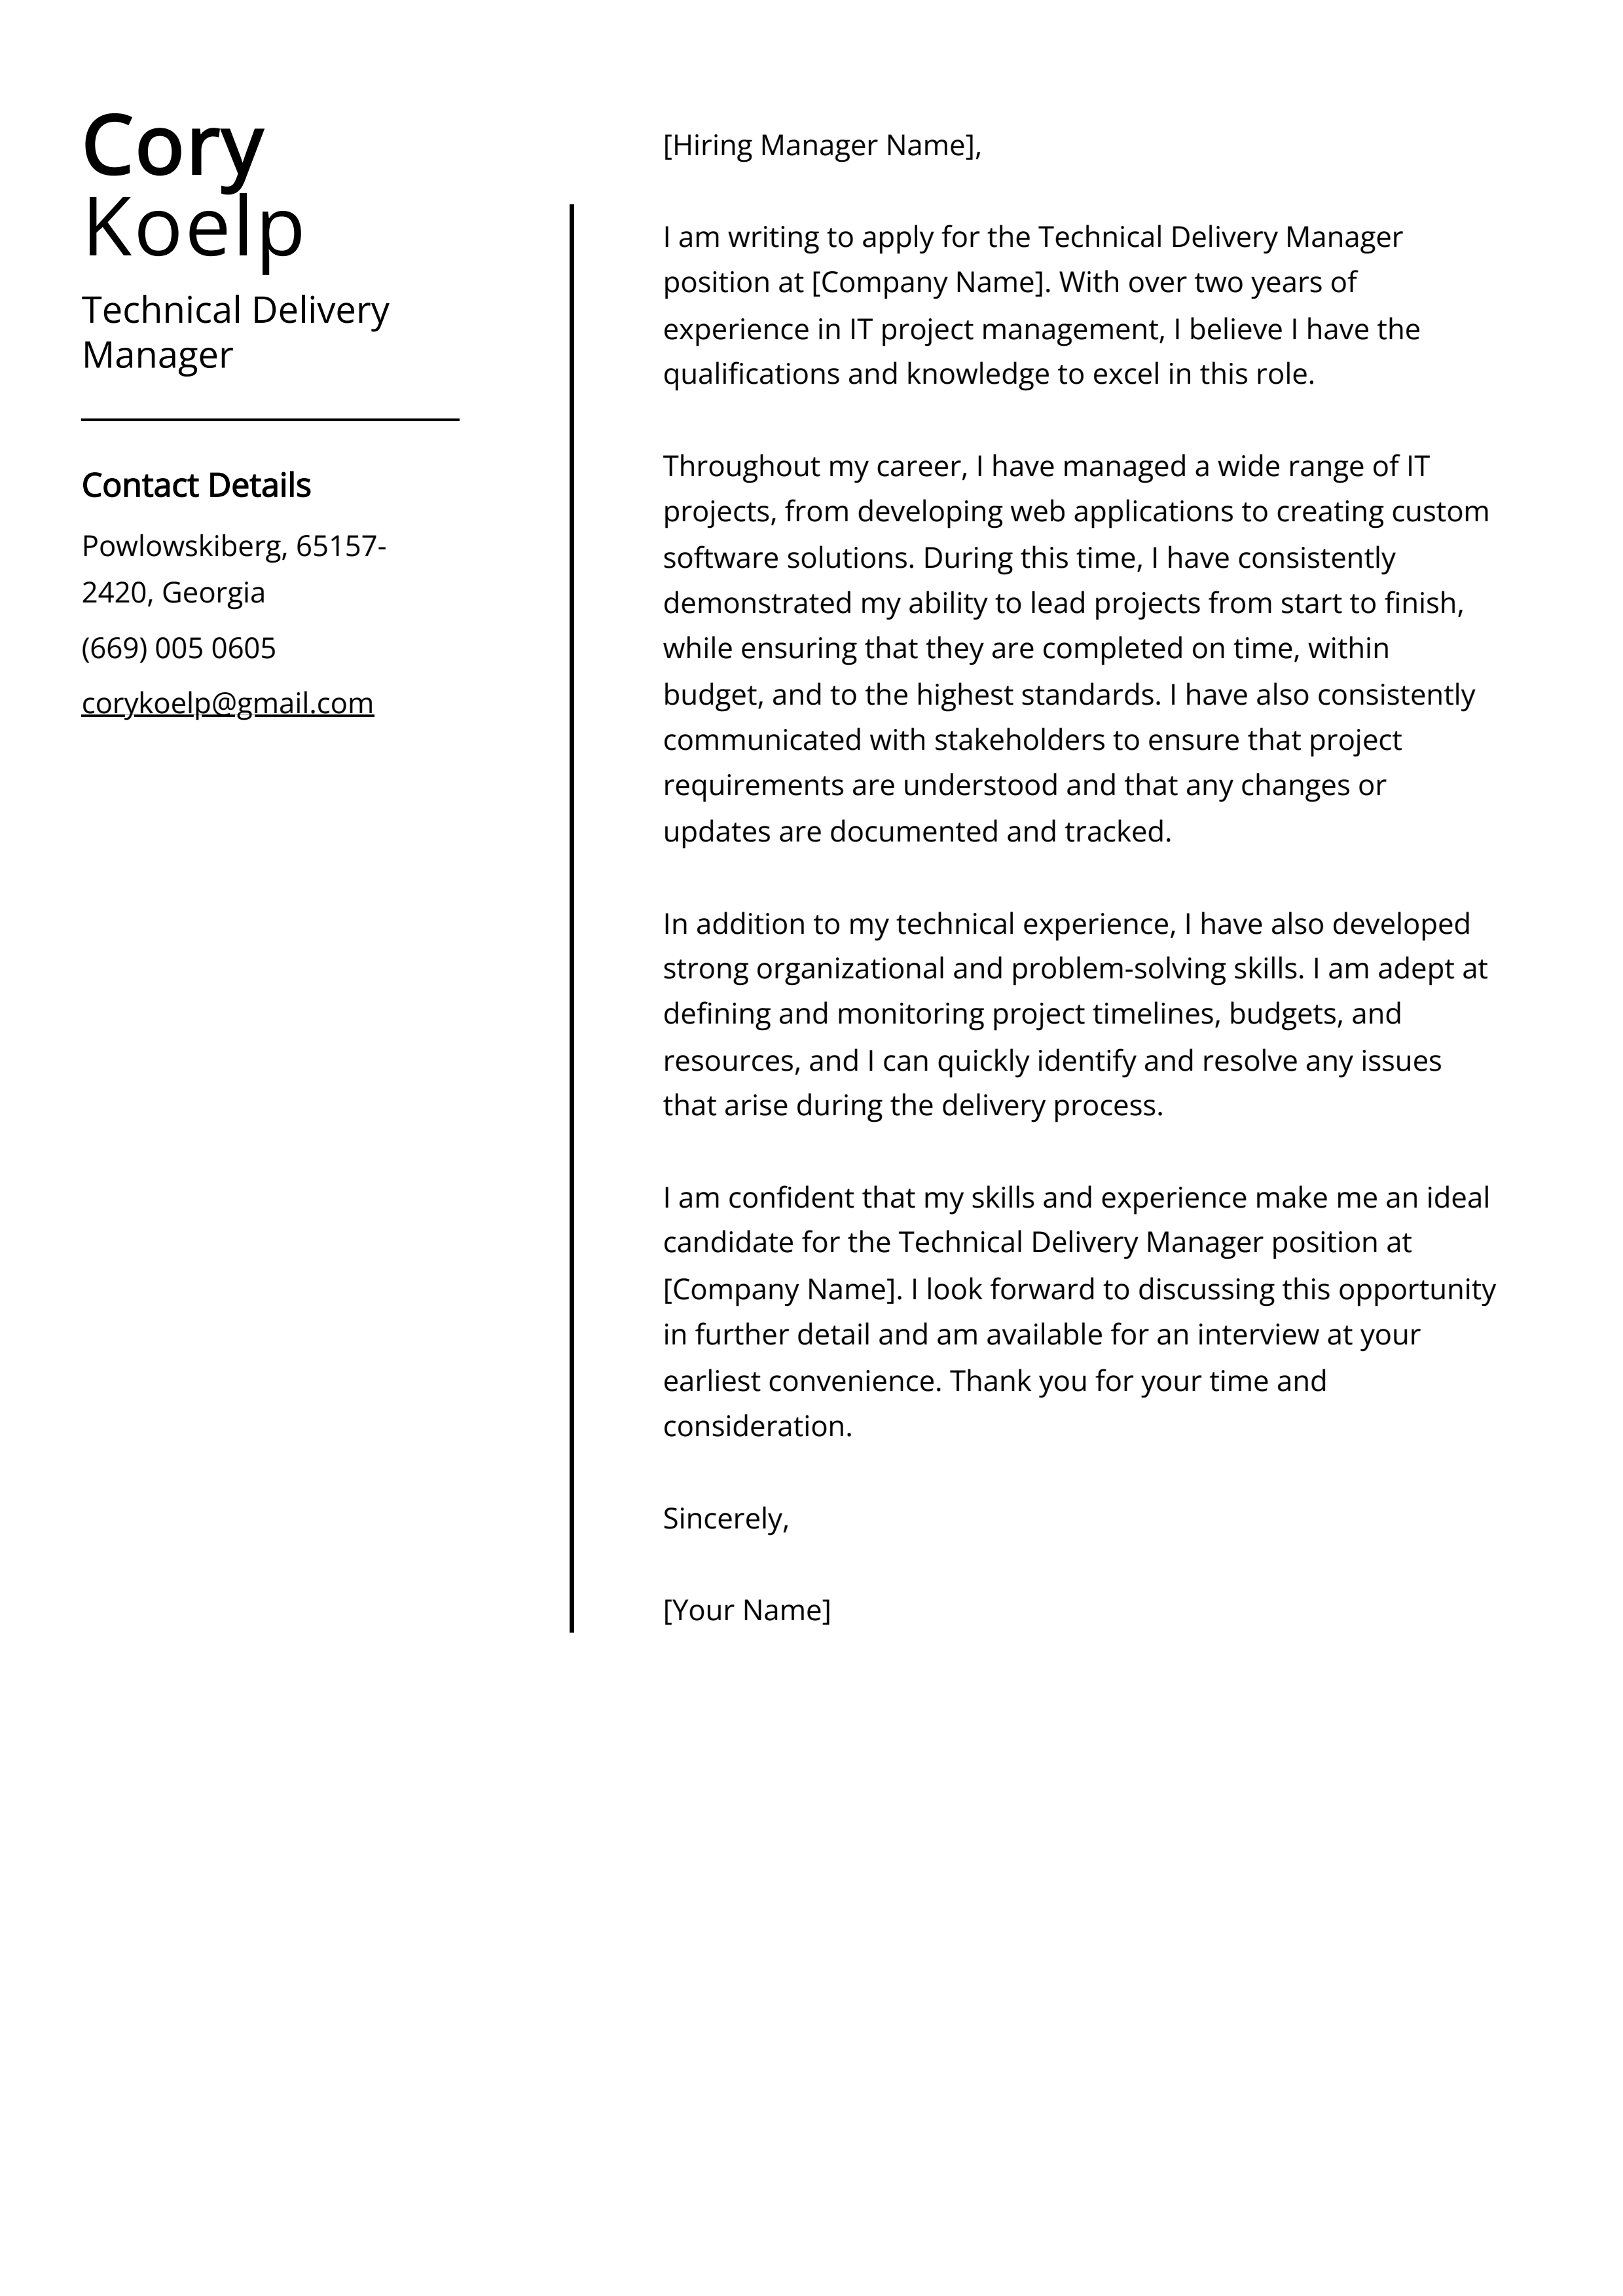 Technical Delivery Manager Cover Letter Example